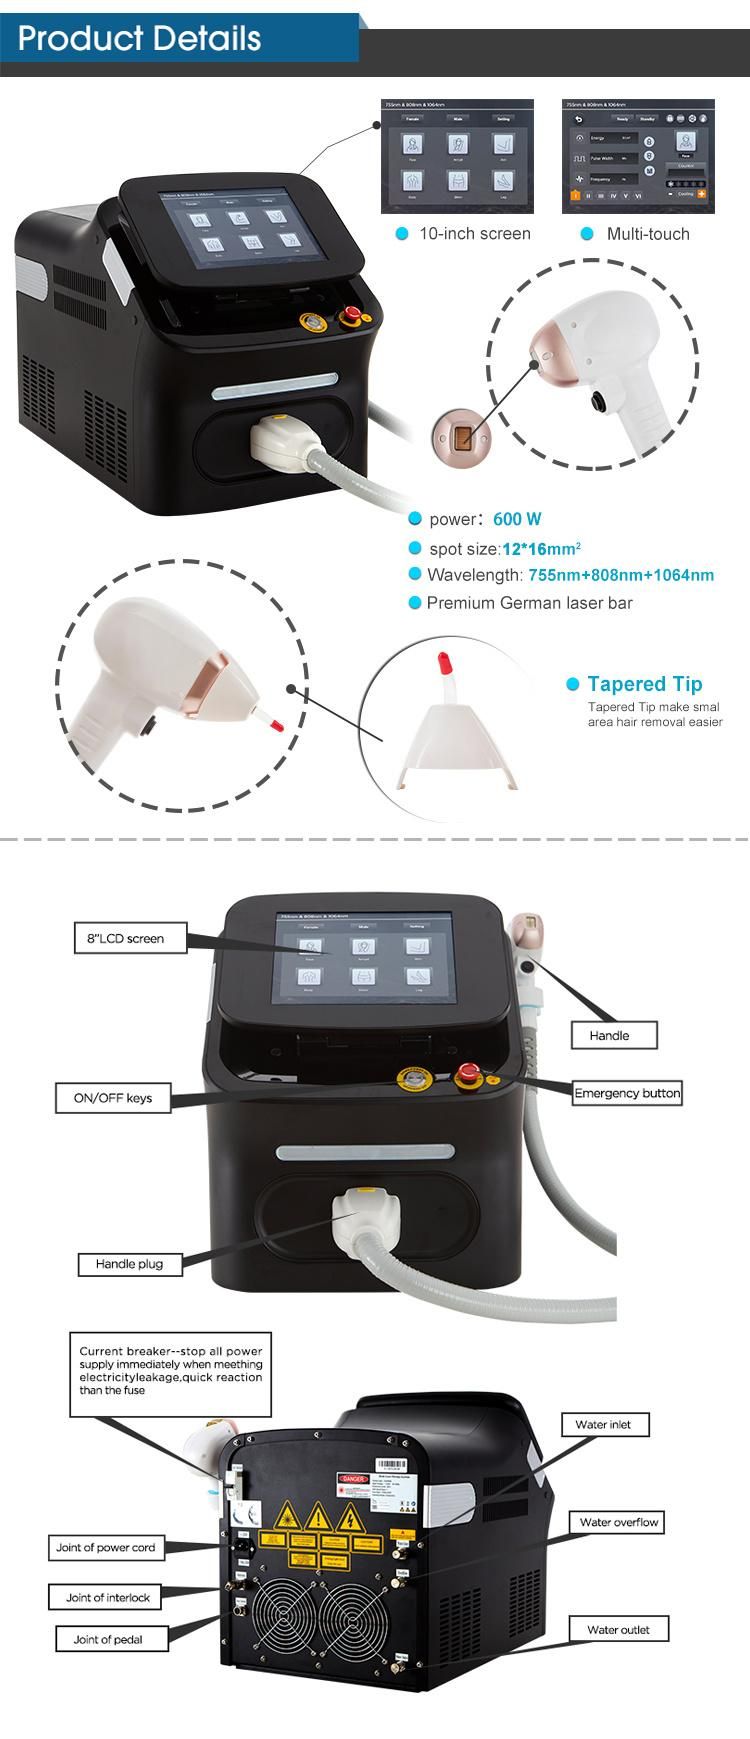 ADSS Portable Salon Equipment Diode Laser for Hair Removal Machine